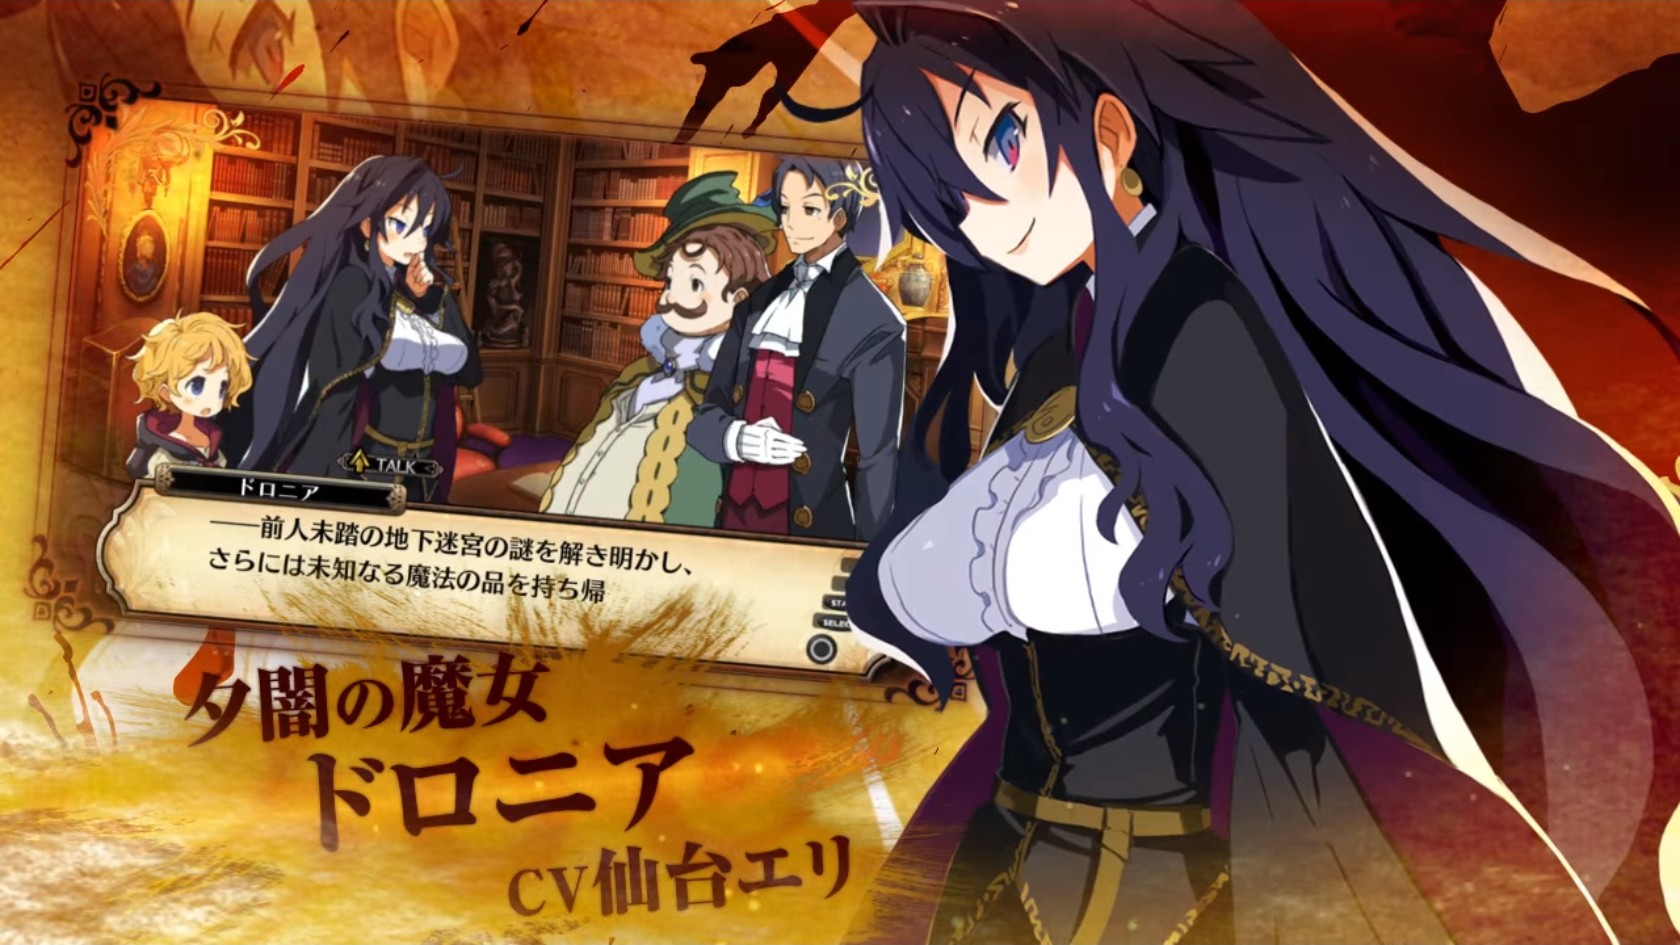 Coven and labyrinth of refrain 6